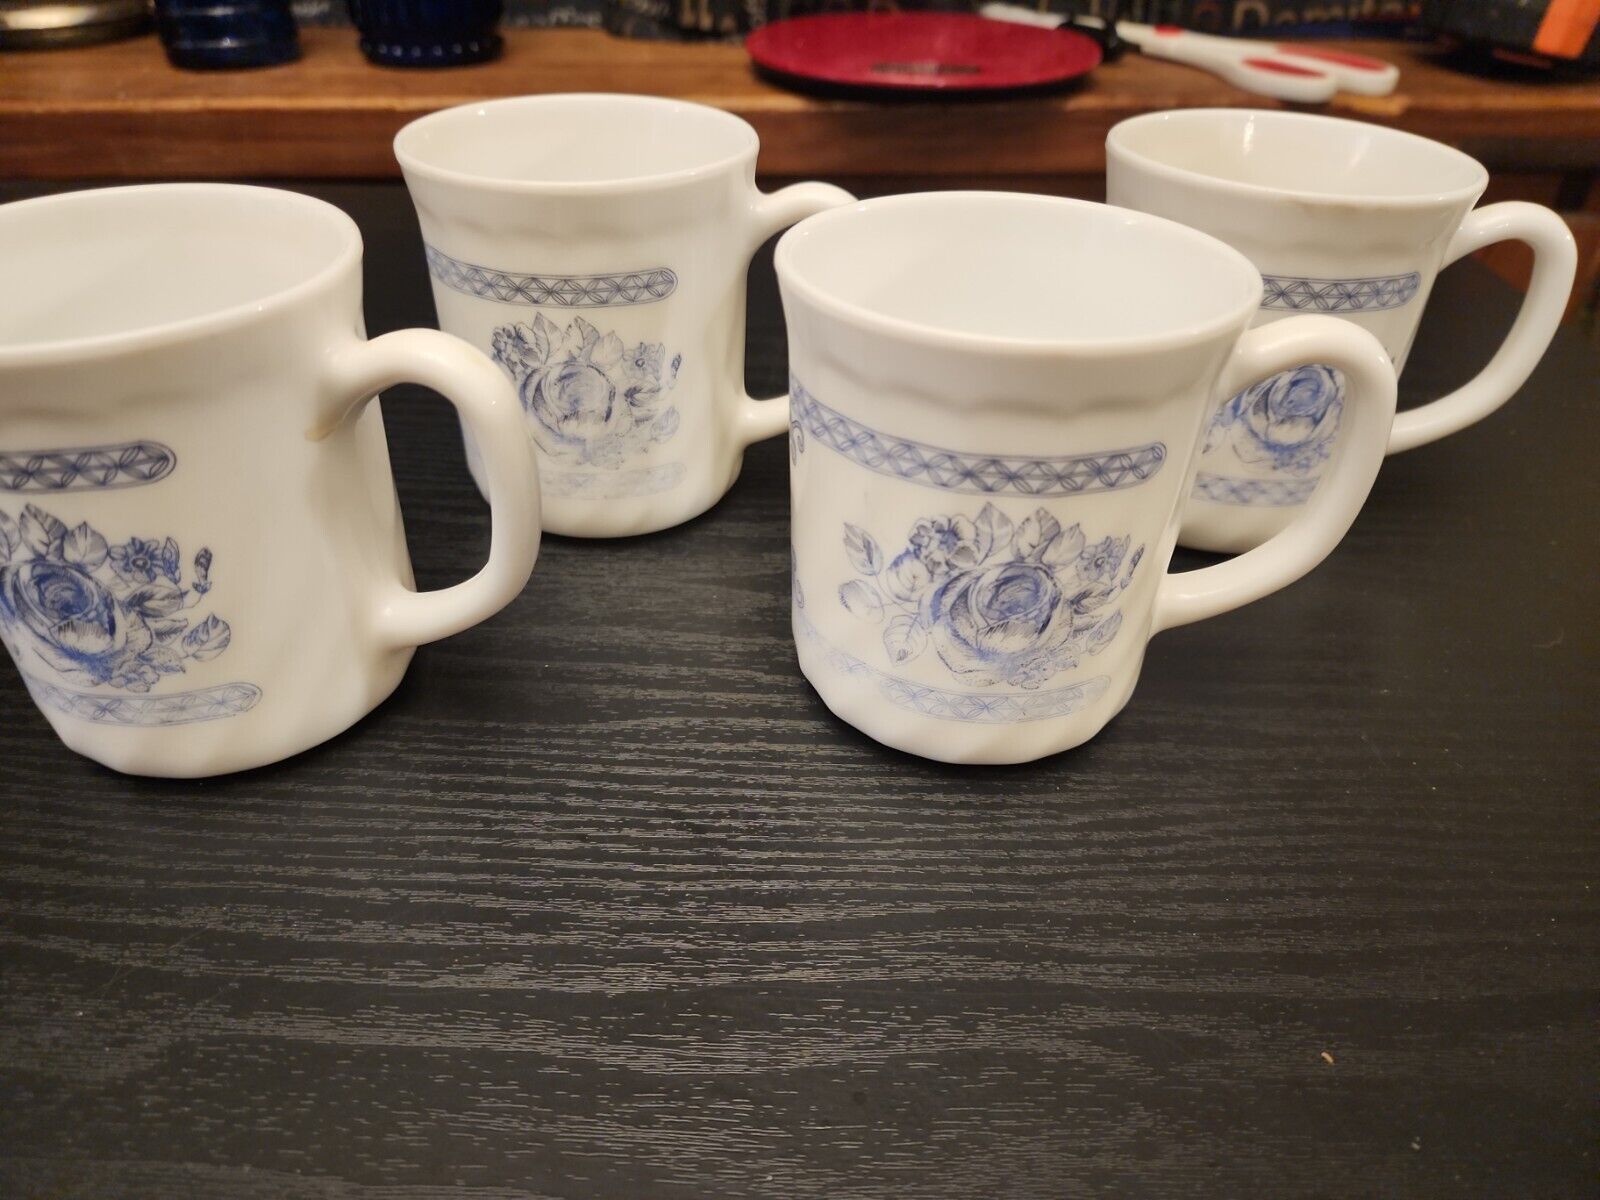 Vintage Arcopal Honorine Mugs White with Blue Floral French Country Set of 4 (1)